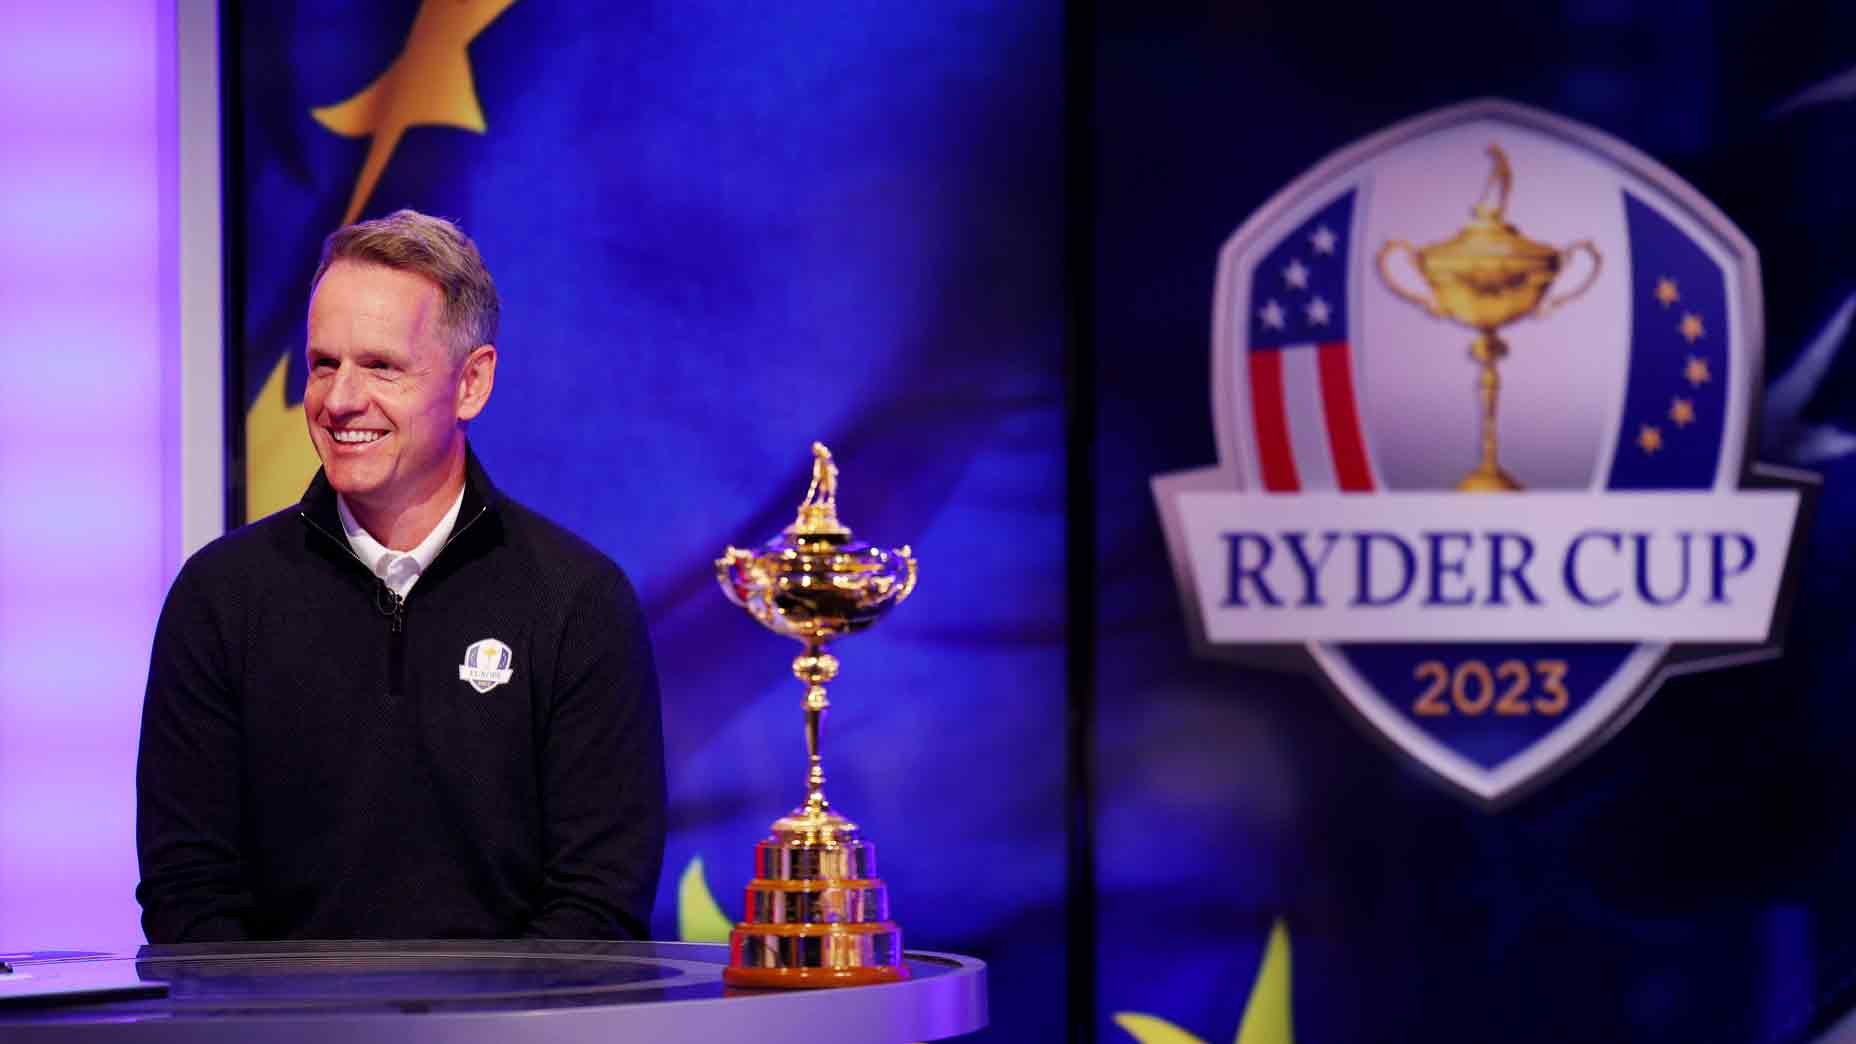 Ryder Cup 2023 6 surprising players you won't see on Team Europe